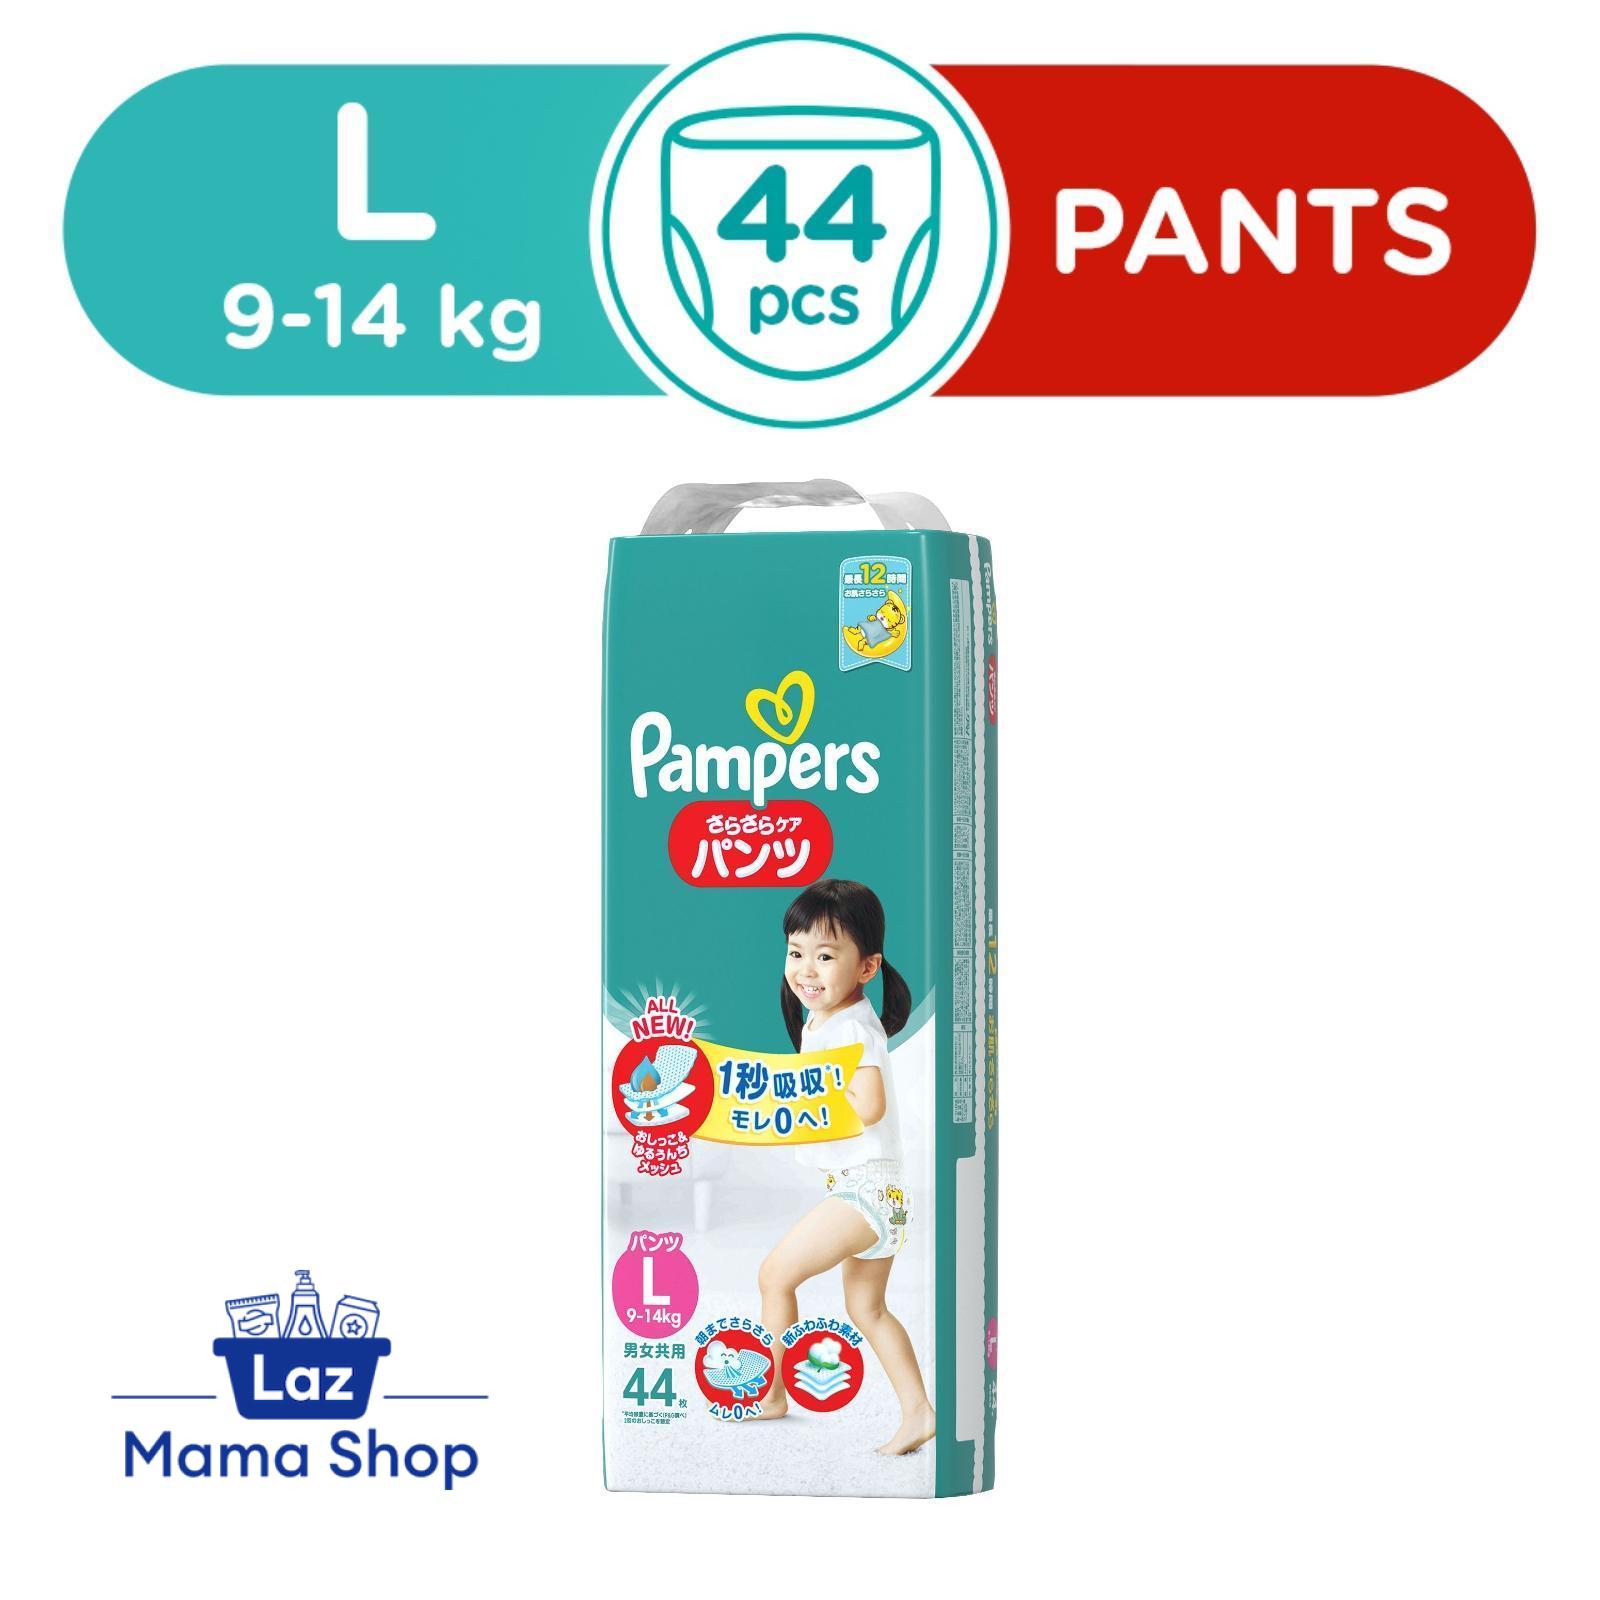 Buy Pampers Baby Diaper - Pants, Large, 9-14 kg, Soft Cotton, Soaks up to  12 Hours Online at Best Price of Rs 1910 - bigbasket